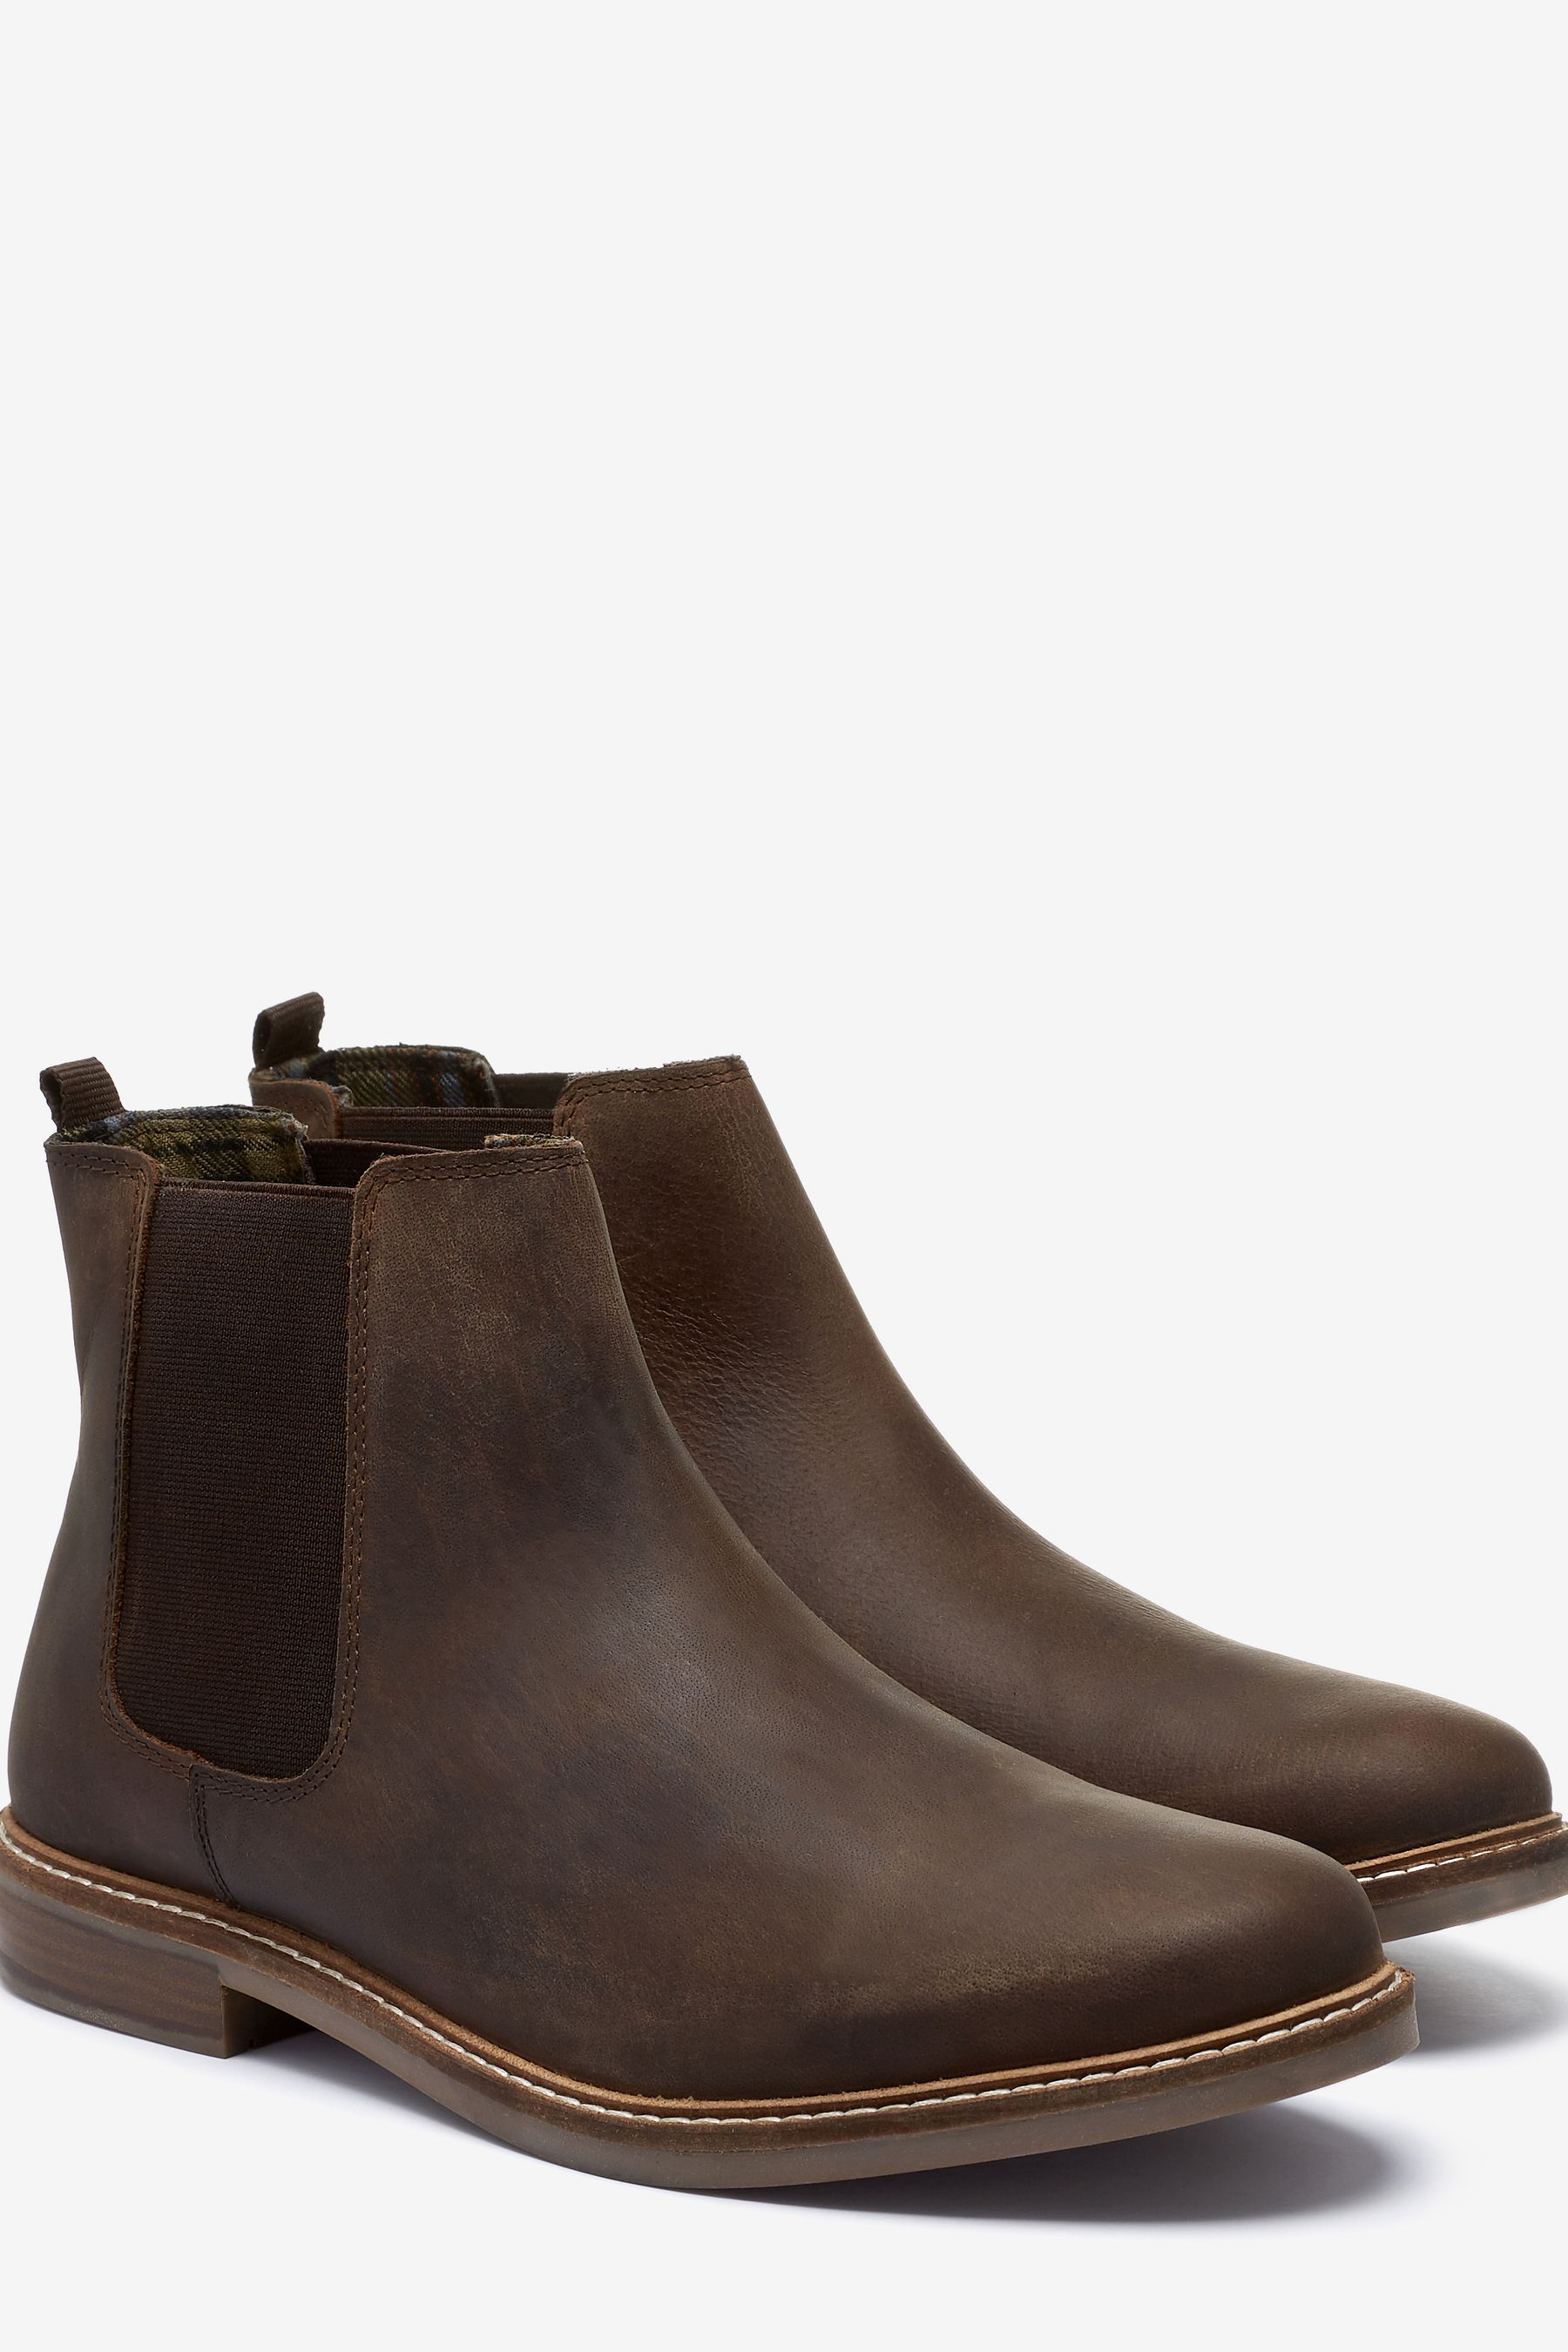 Buy Brown Waxy Finish Leather Chelsea Boots from the Next UK online shop